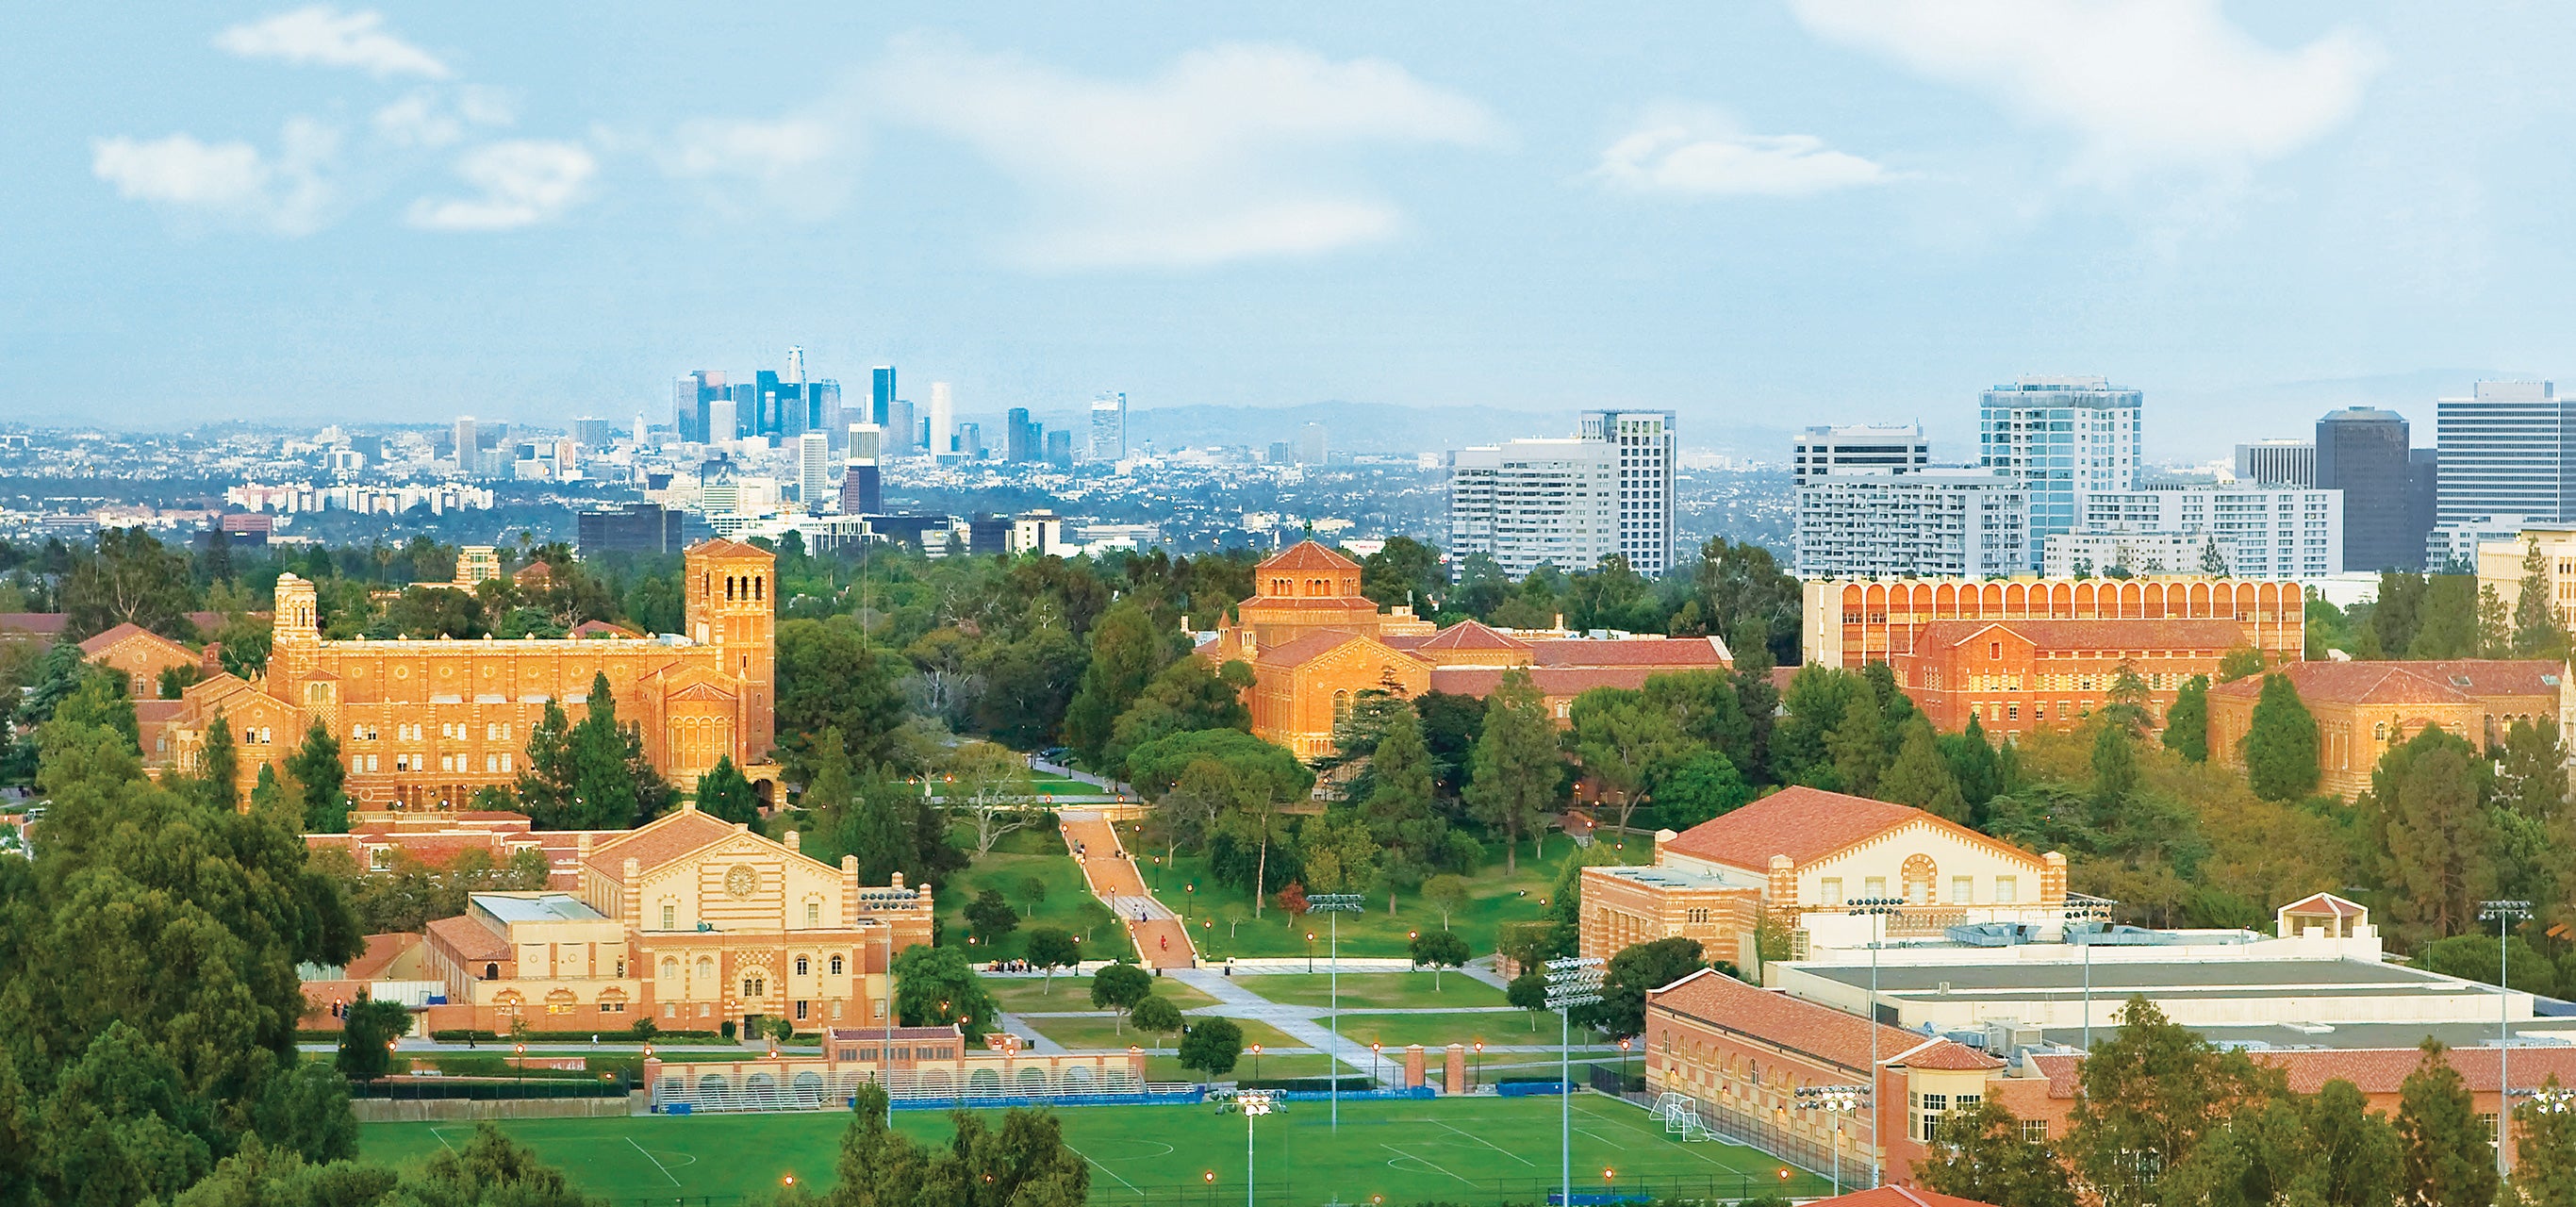 Warm light brightens the UCLA campus from afar.